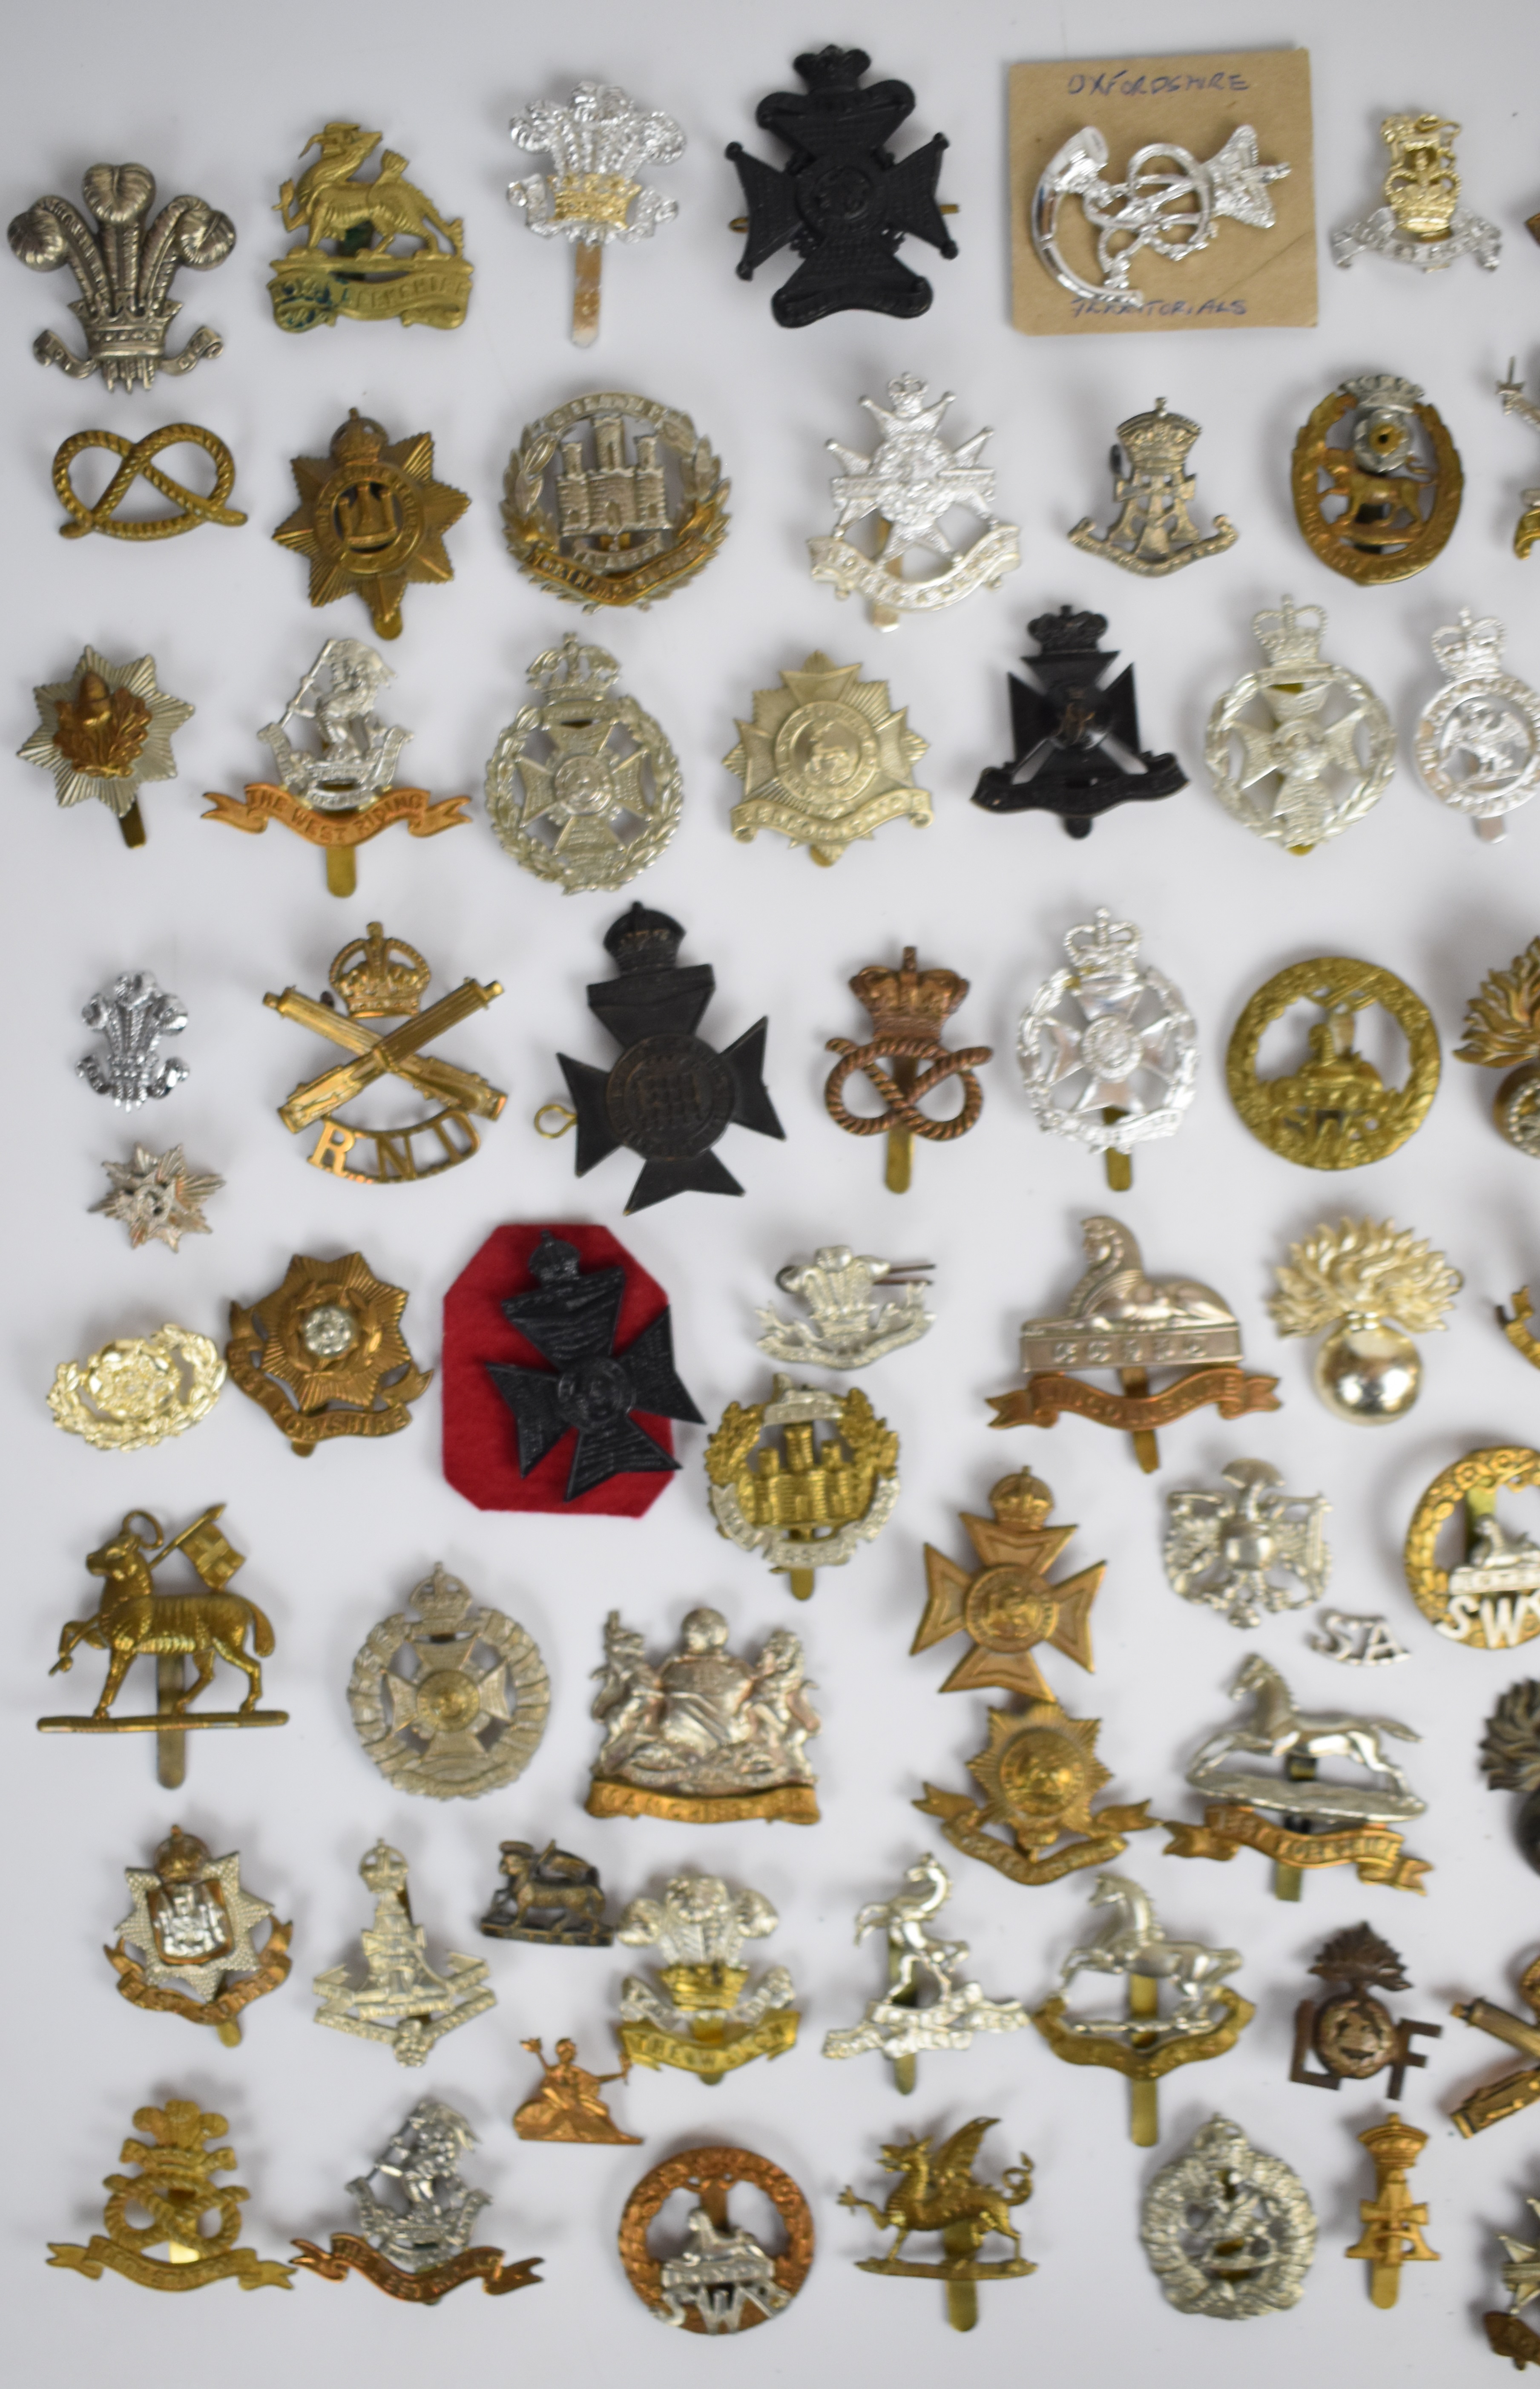 Large collection of approximately 100 British Army cap badges including Lancashire Fusiliers, - Image 2 of 3